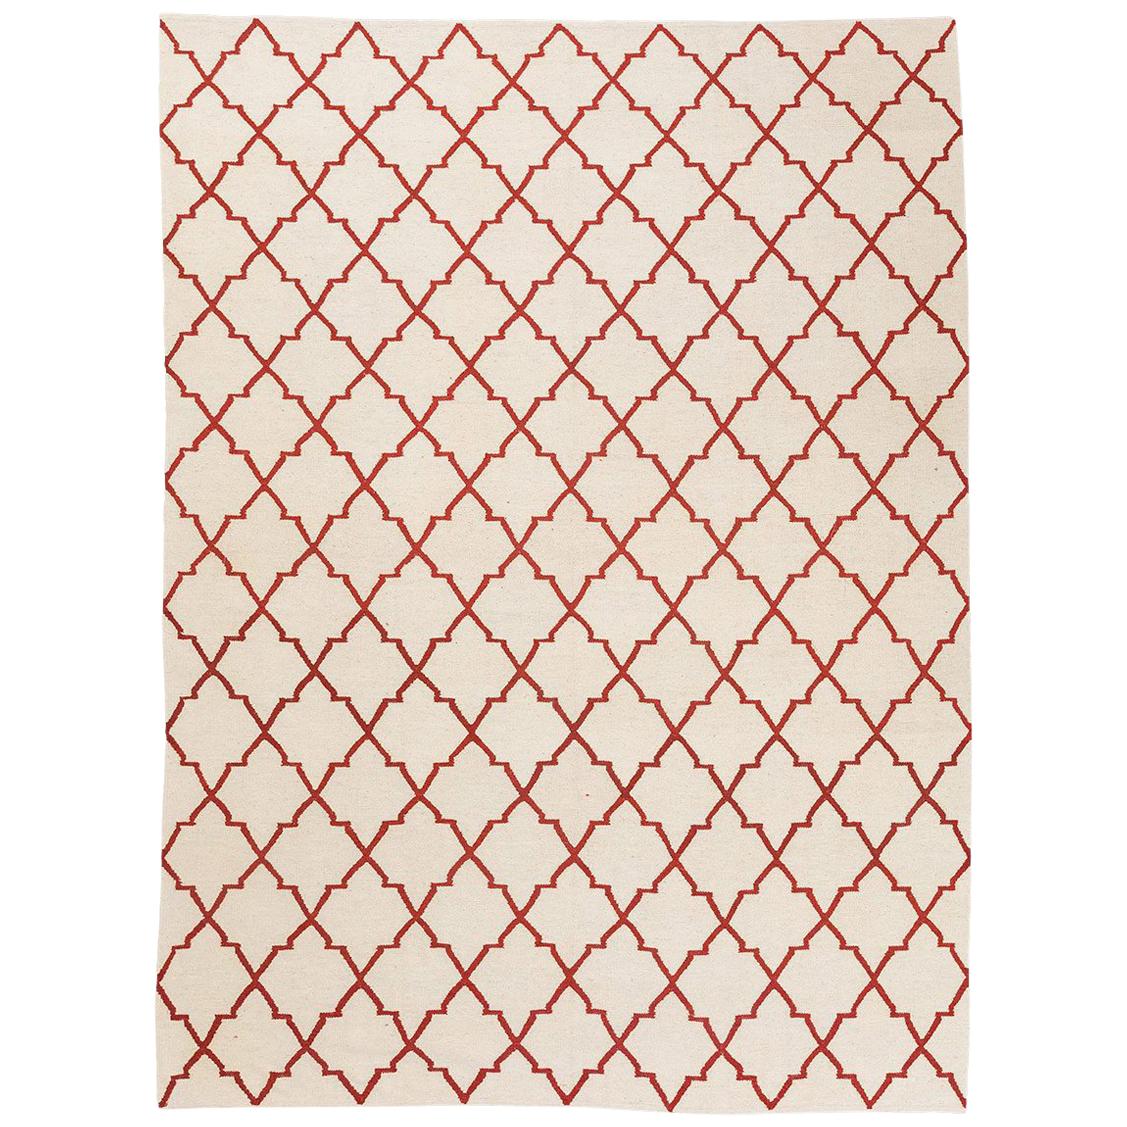 Contemporary Kilim, Geometric Design with Red and Beige Colors